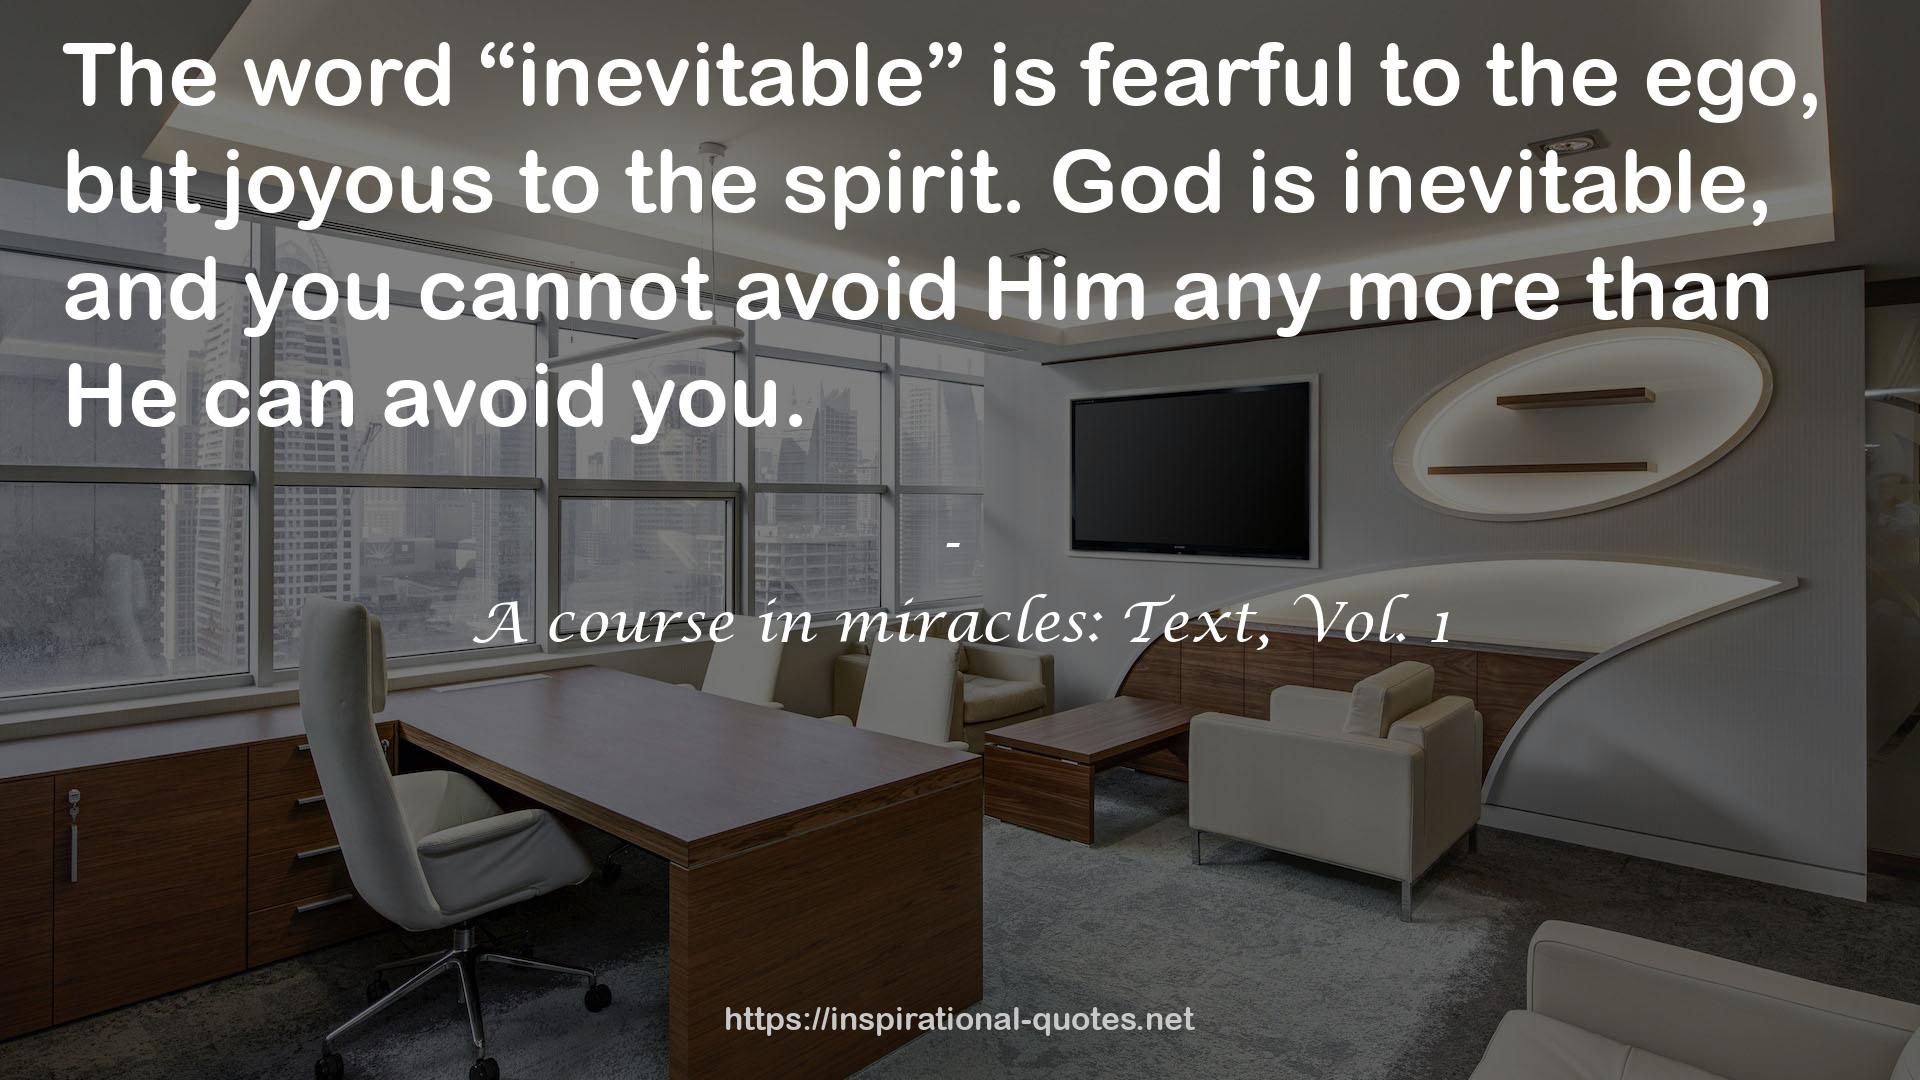 A course in miracles: Text, Vol. 1 QUOTES